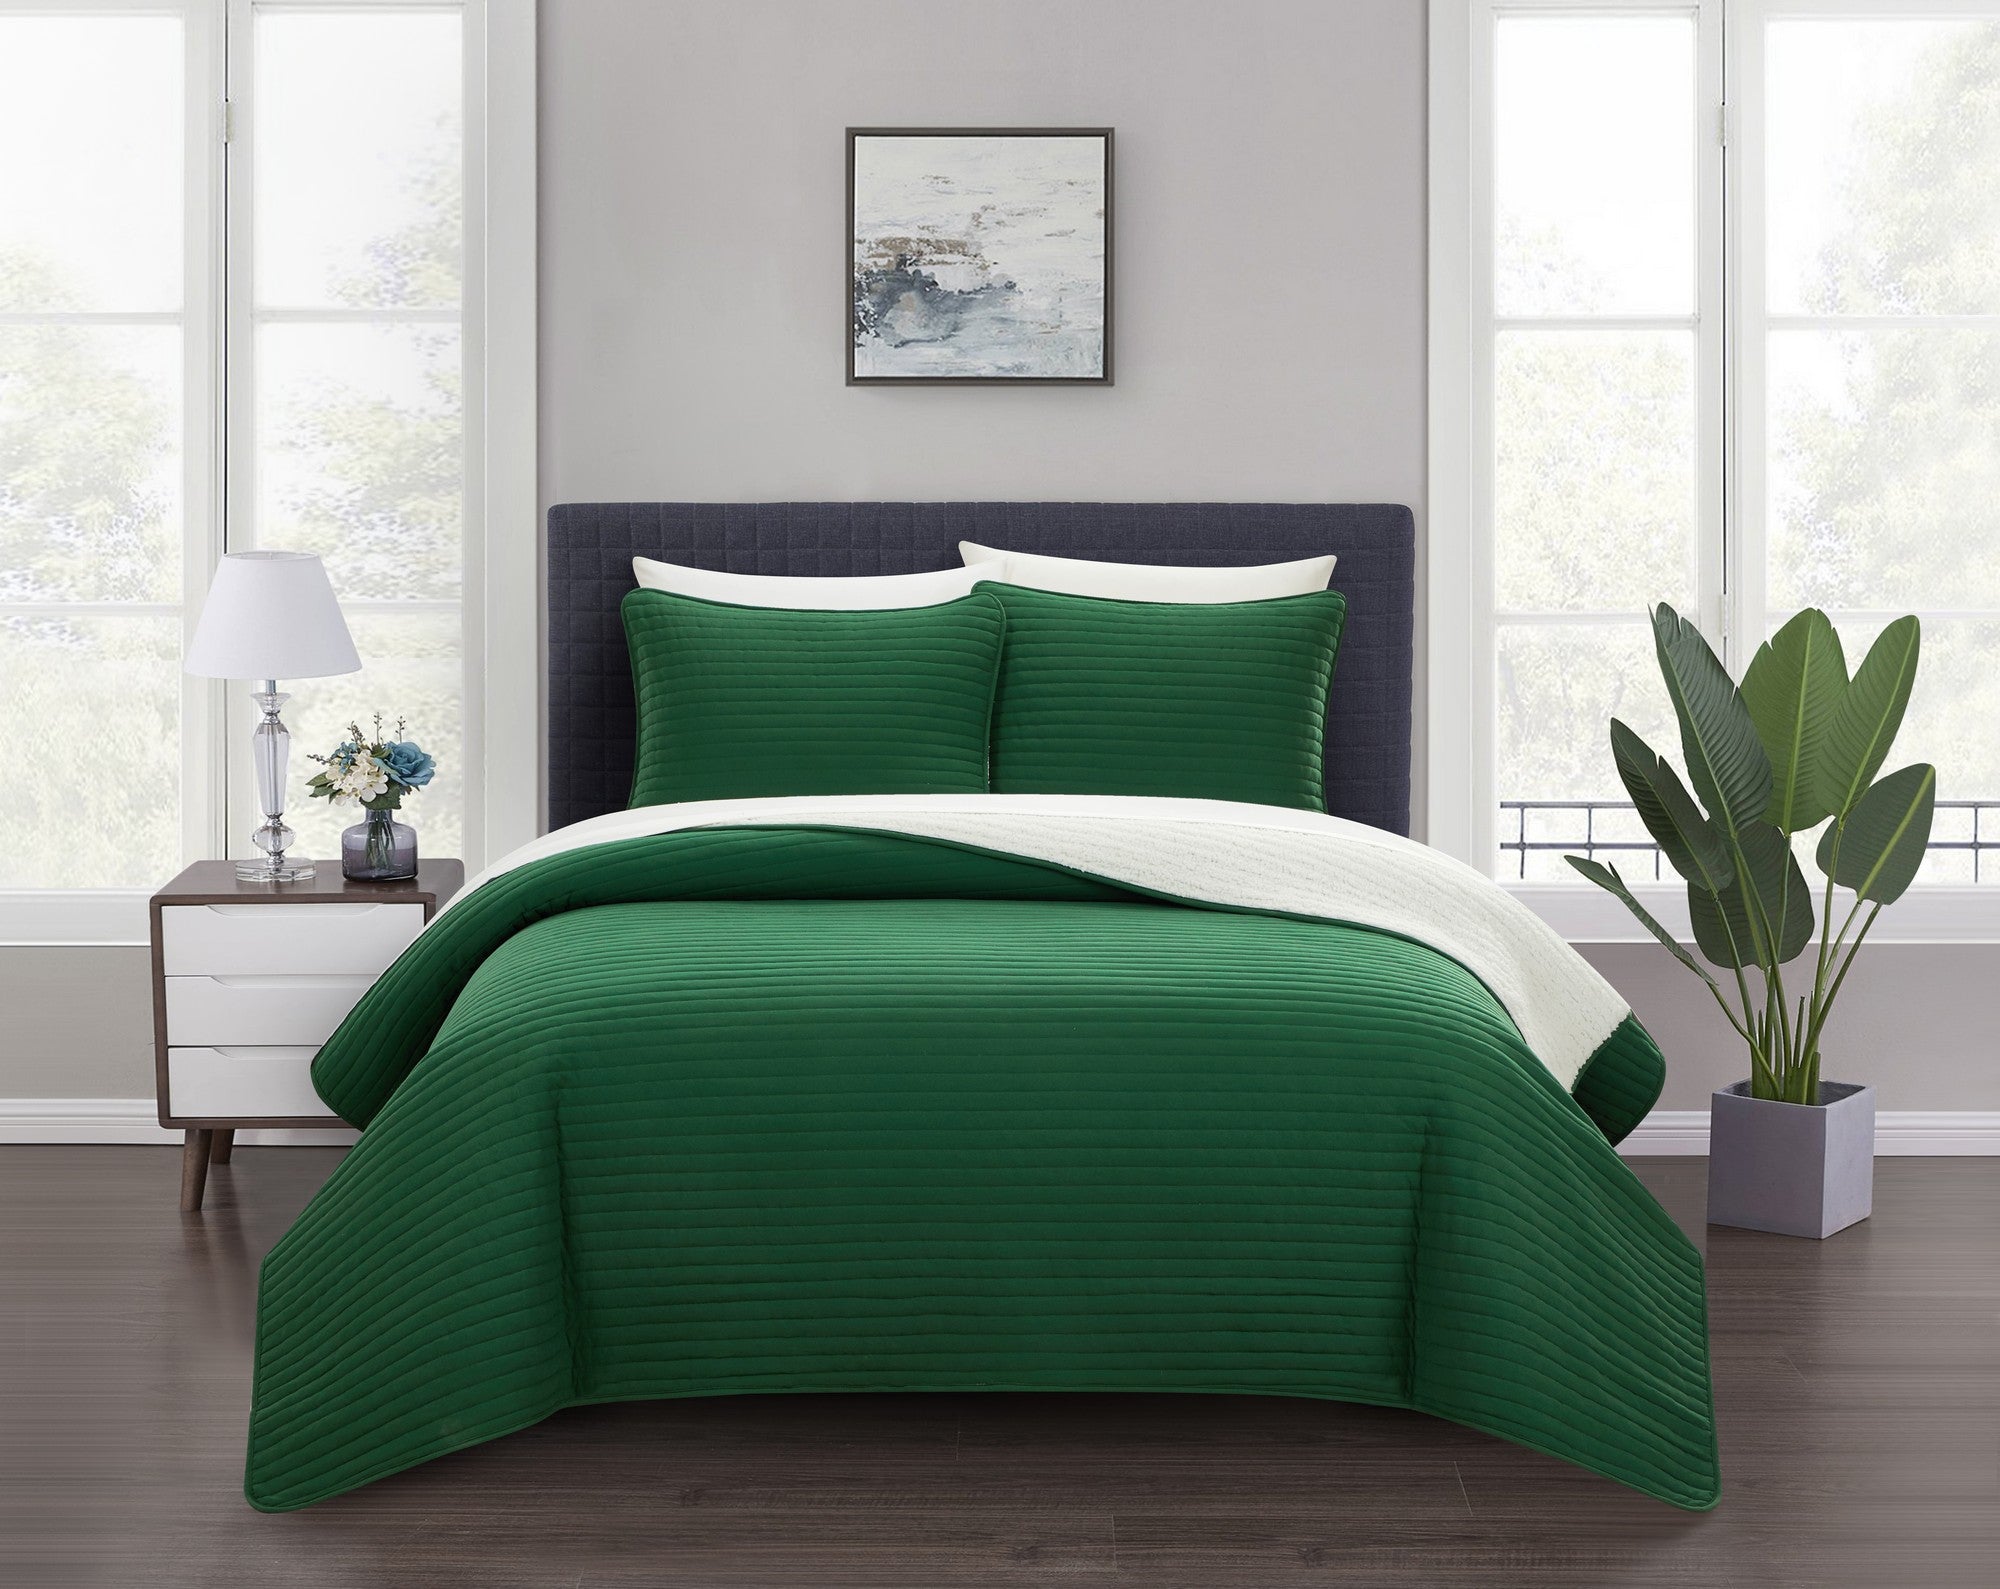 Chic Home St Paul Quilt Set Contemporary Striped Design Sherpa Lined Bedding - Pillow Shams Included - 3 Piece - Green